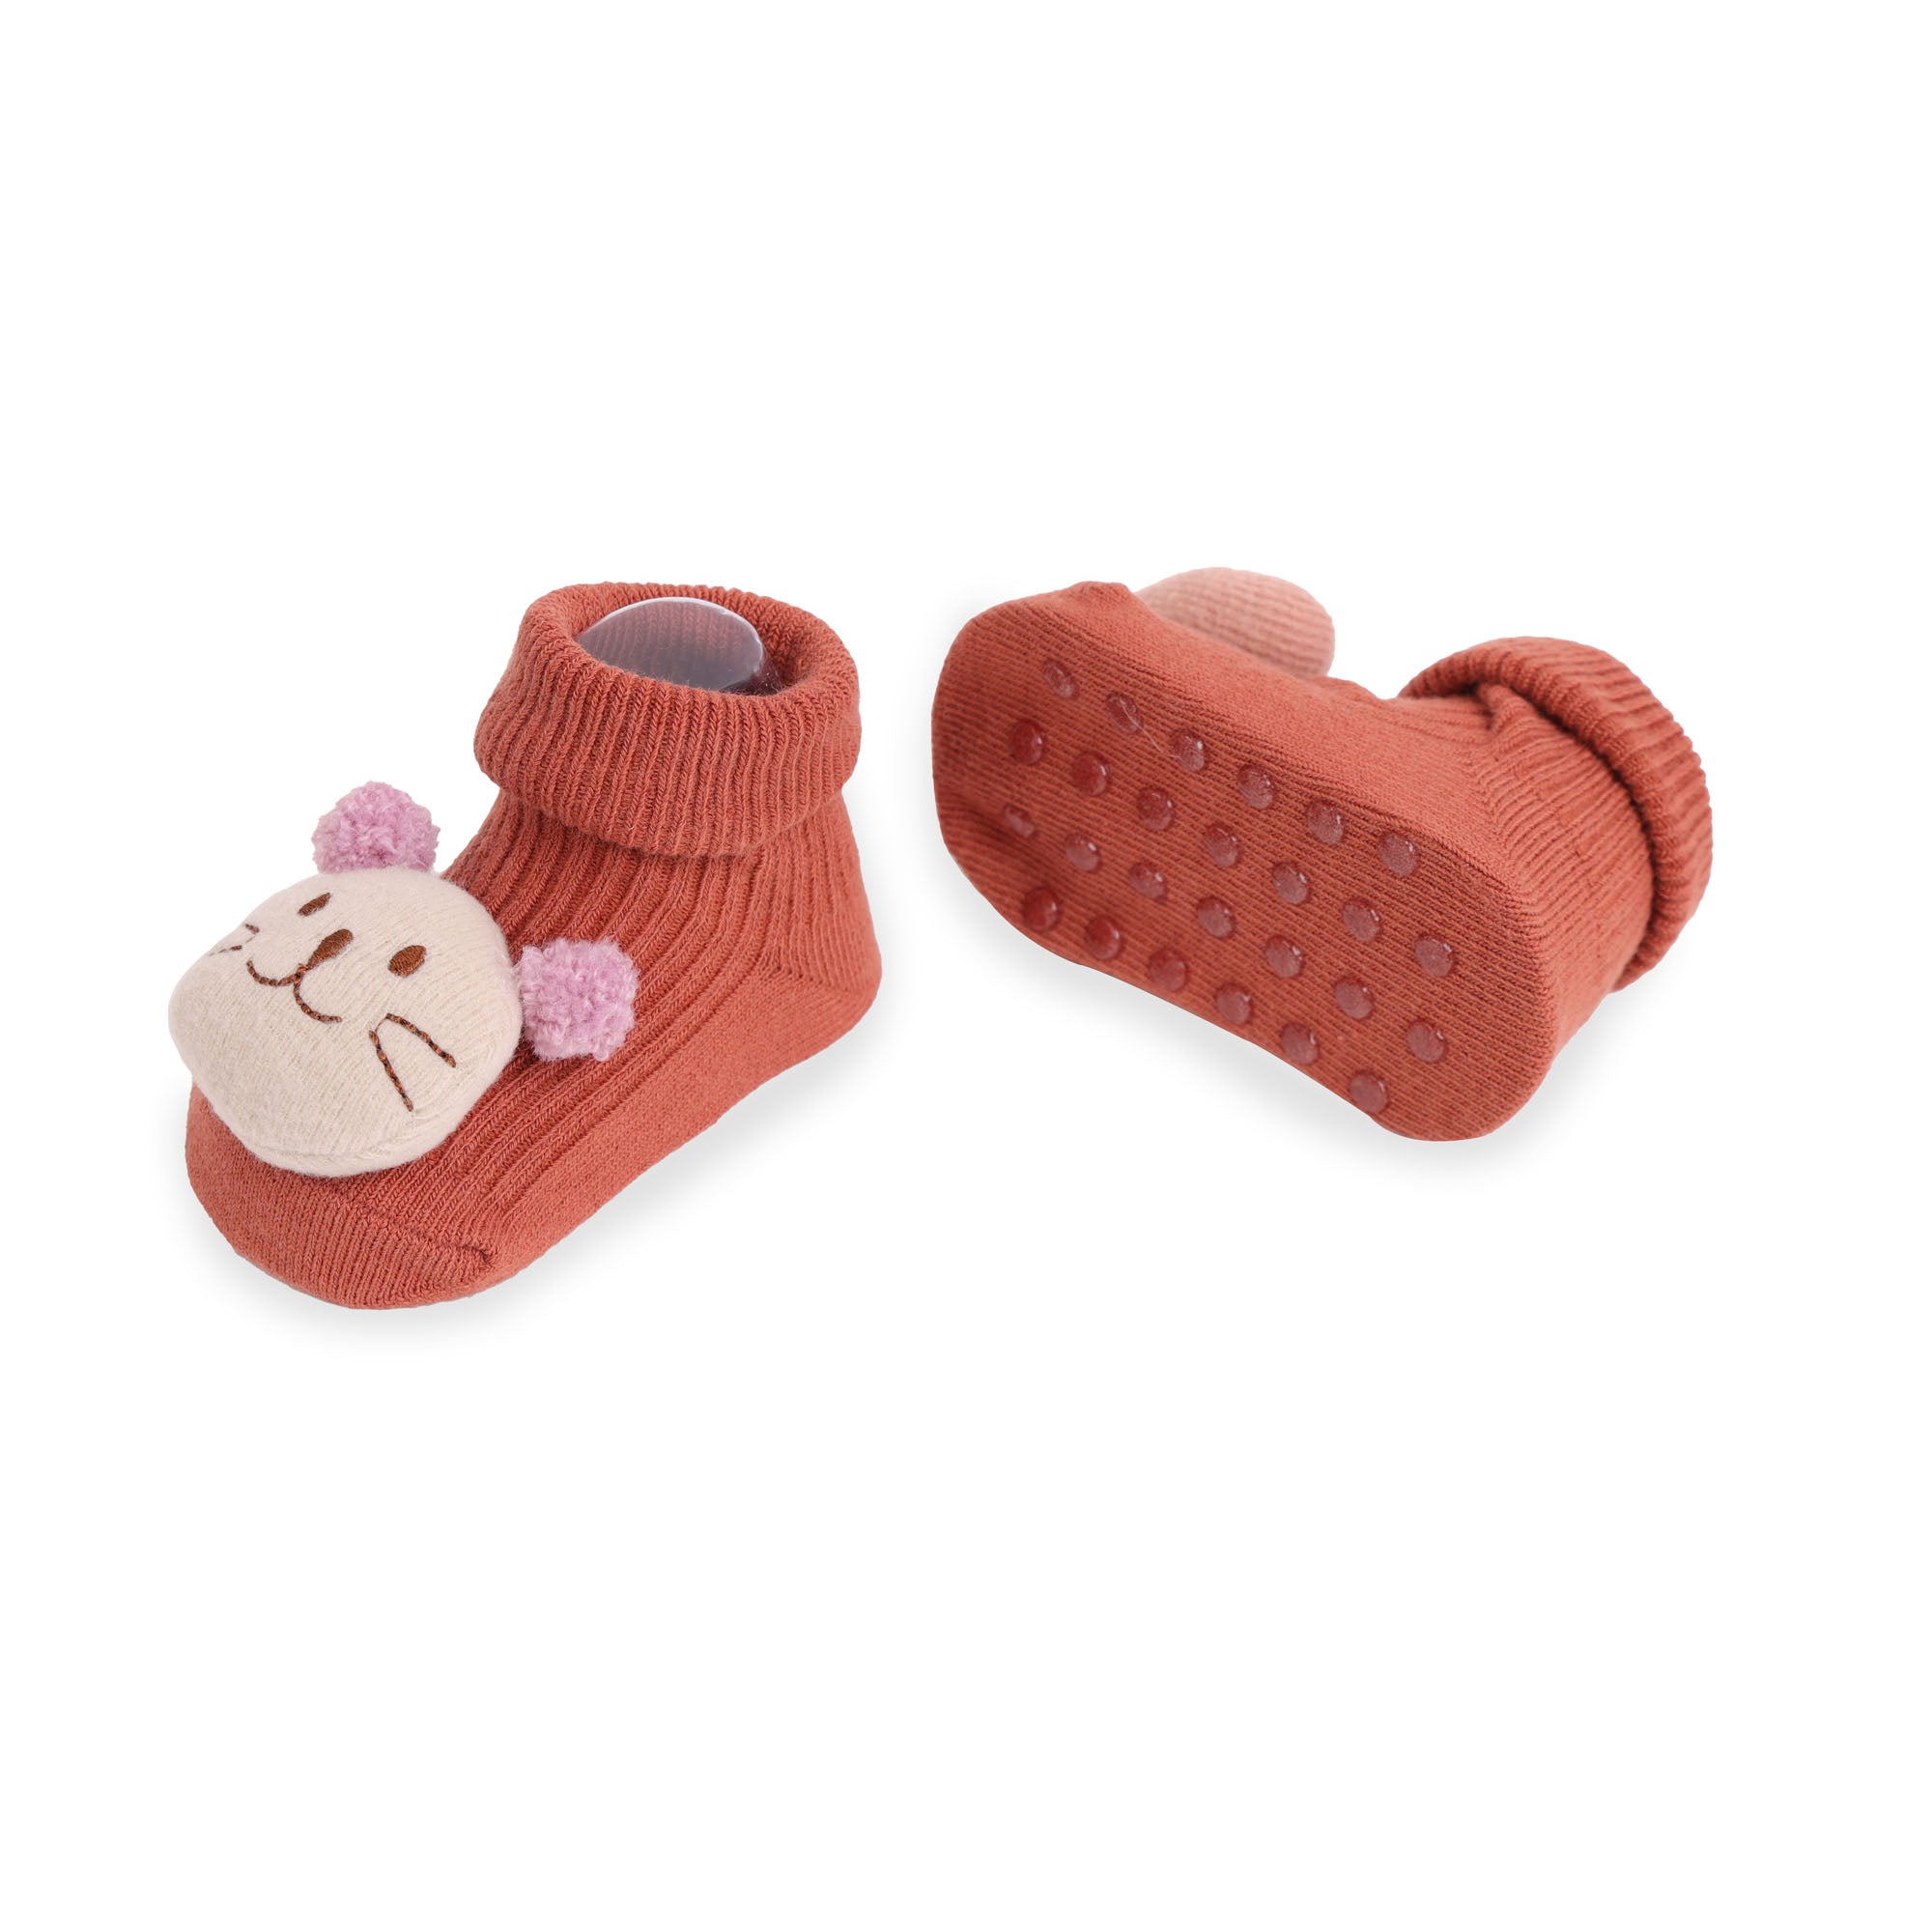 Kitty’s Love Pink & Red 3D Socks - 2 Pack